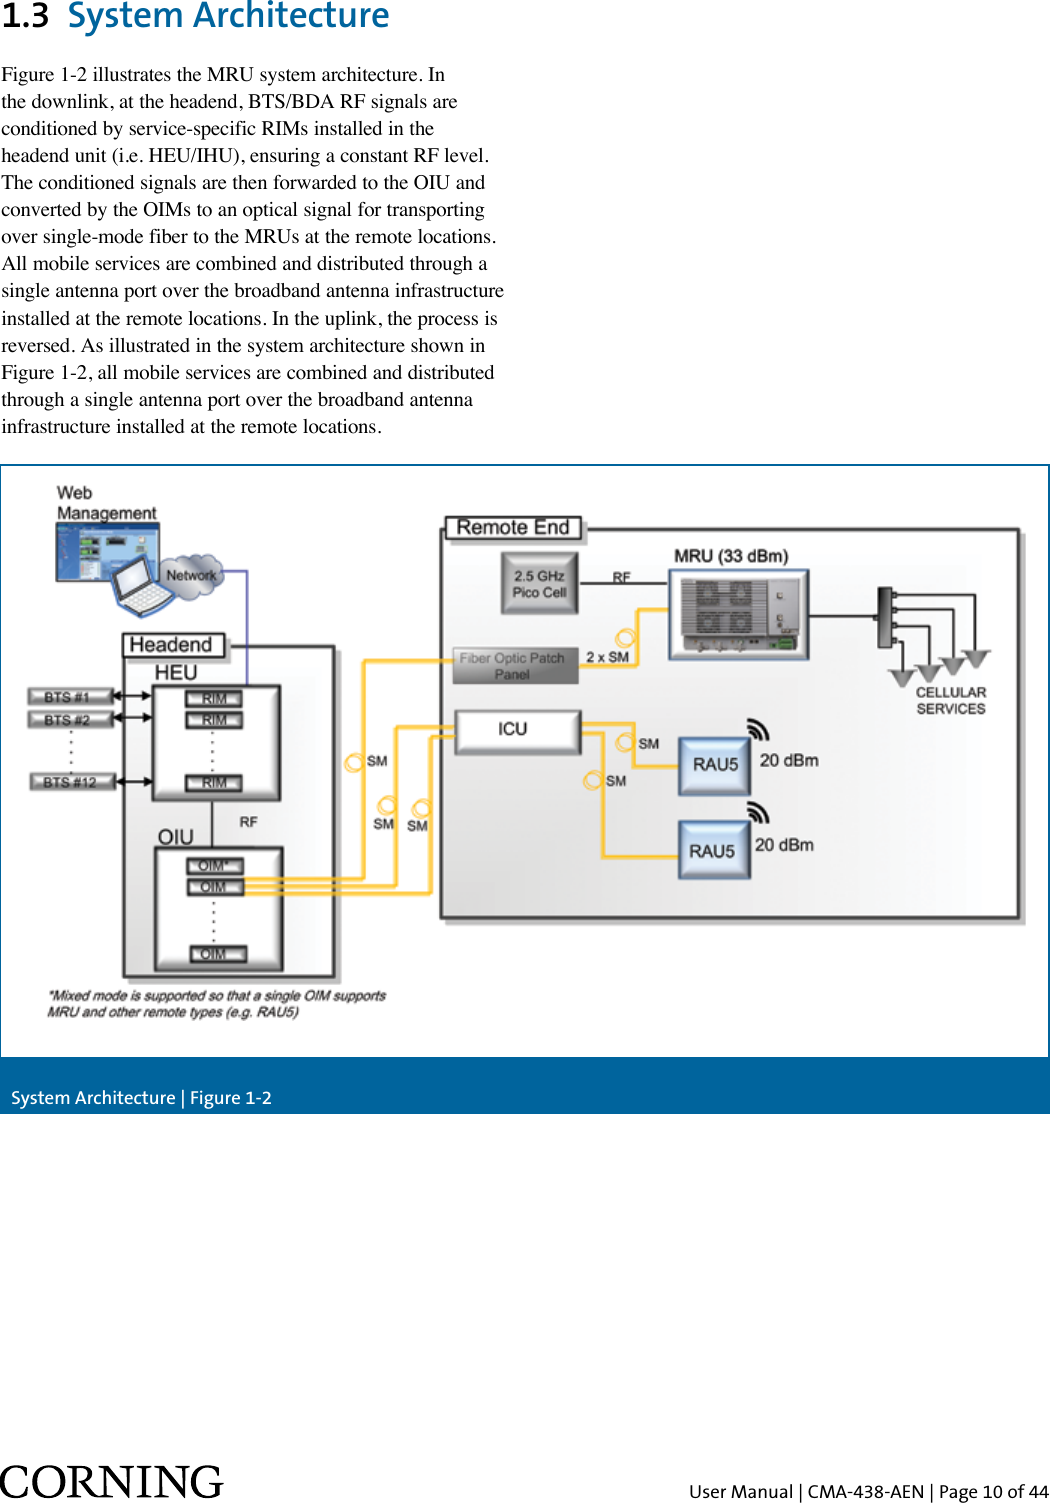 User Manual | CMA-438-AEN | Page 10 of 44System Architecture | Figure 1-21.3  System ArchitectureFigure 1-2 illustrates the MRU system architecture. In the downlink, at the headend, BTS/BDA RF signals are conditioned by service-specific RIMs installed in the headend unit (i.e. HEU/IHU), ensuring a constant RF level.  The conditioned signals are then forwarded to the OIU and converted by the OIMs to an optical signal for transporting over single-mode fiber to the MRUs at the remote locations. All mobile services are combined and distributed through a single antenna port over the broadband antenna infrastructure installed at the remote locations. In the uplink, the process is reversed. As illustrated in the system architecture shown in Figure 1-2, all mobile services are combined and distributed through a single antenna port over the broadband antenna infrastructure installed at the remote locations.